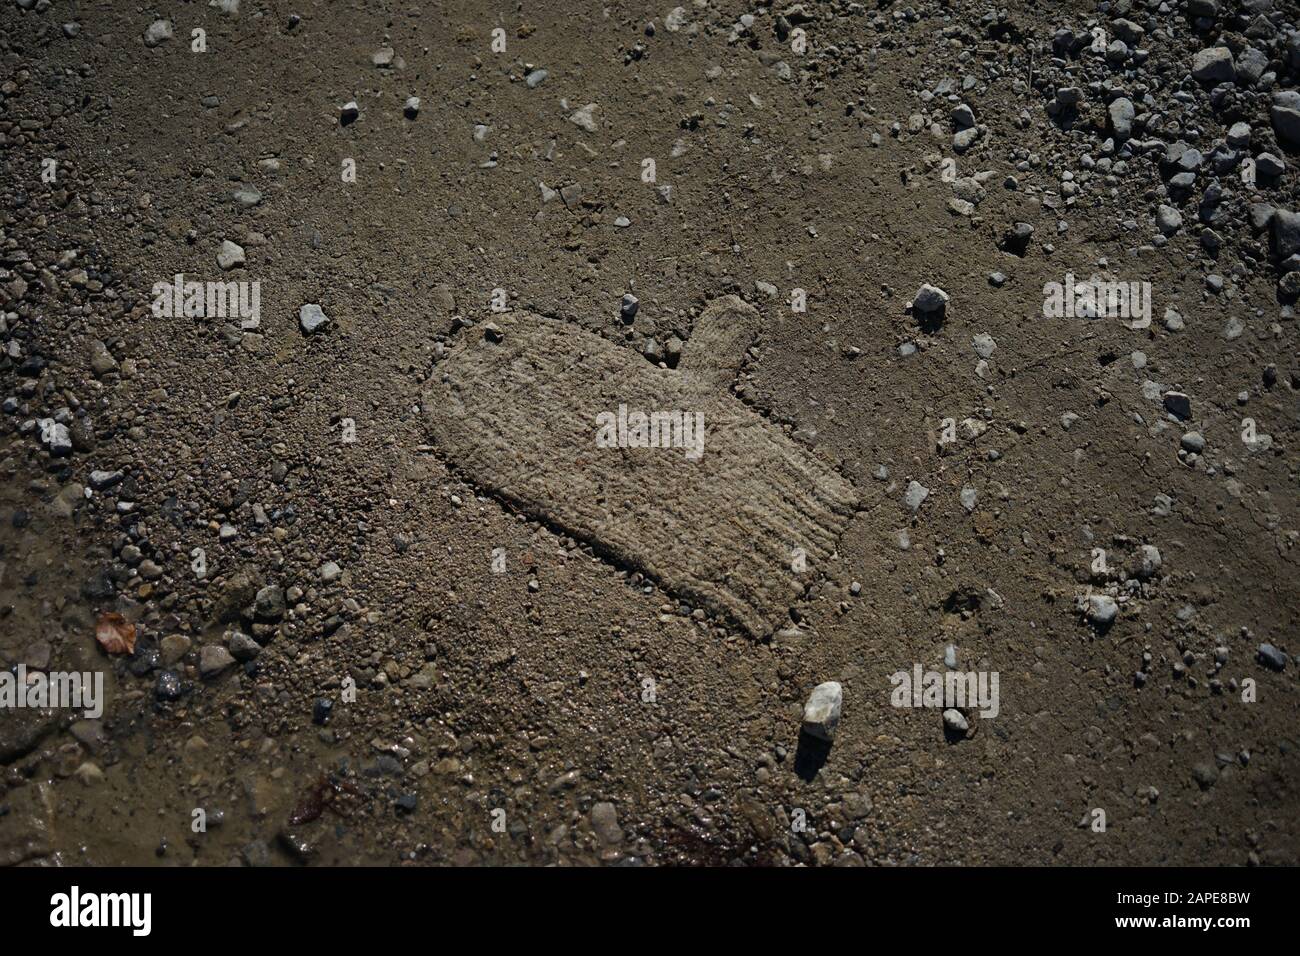 Mitten almost buried in soil surrounded by many rocks Stock Photo